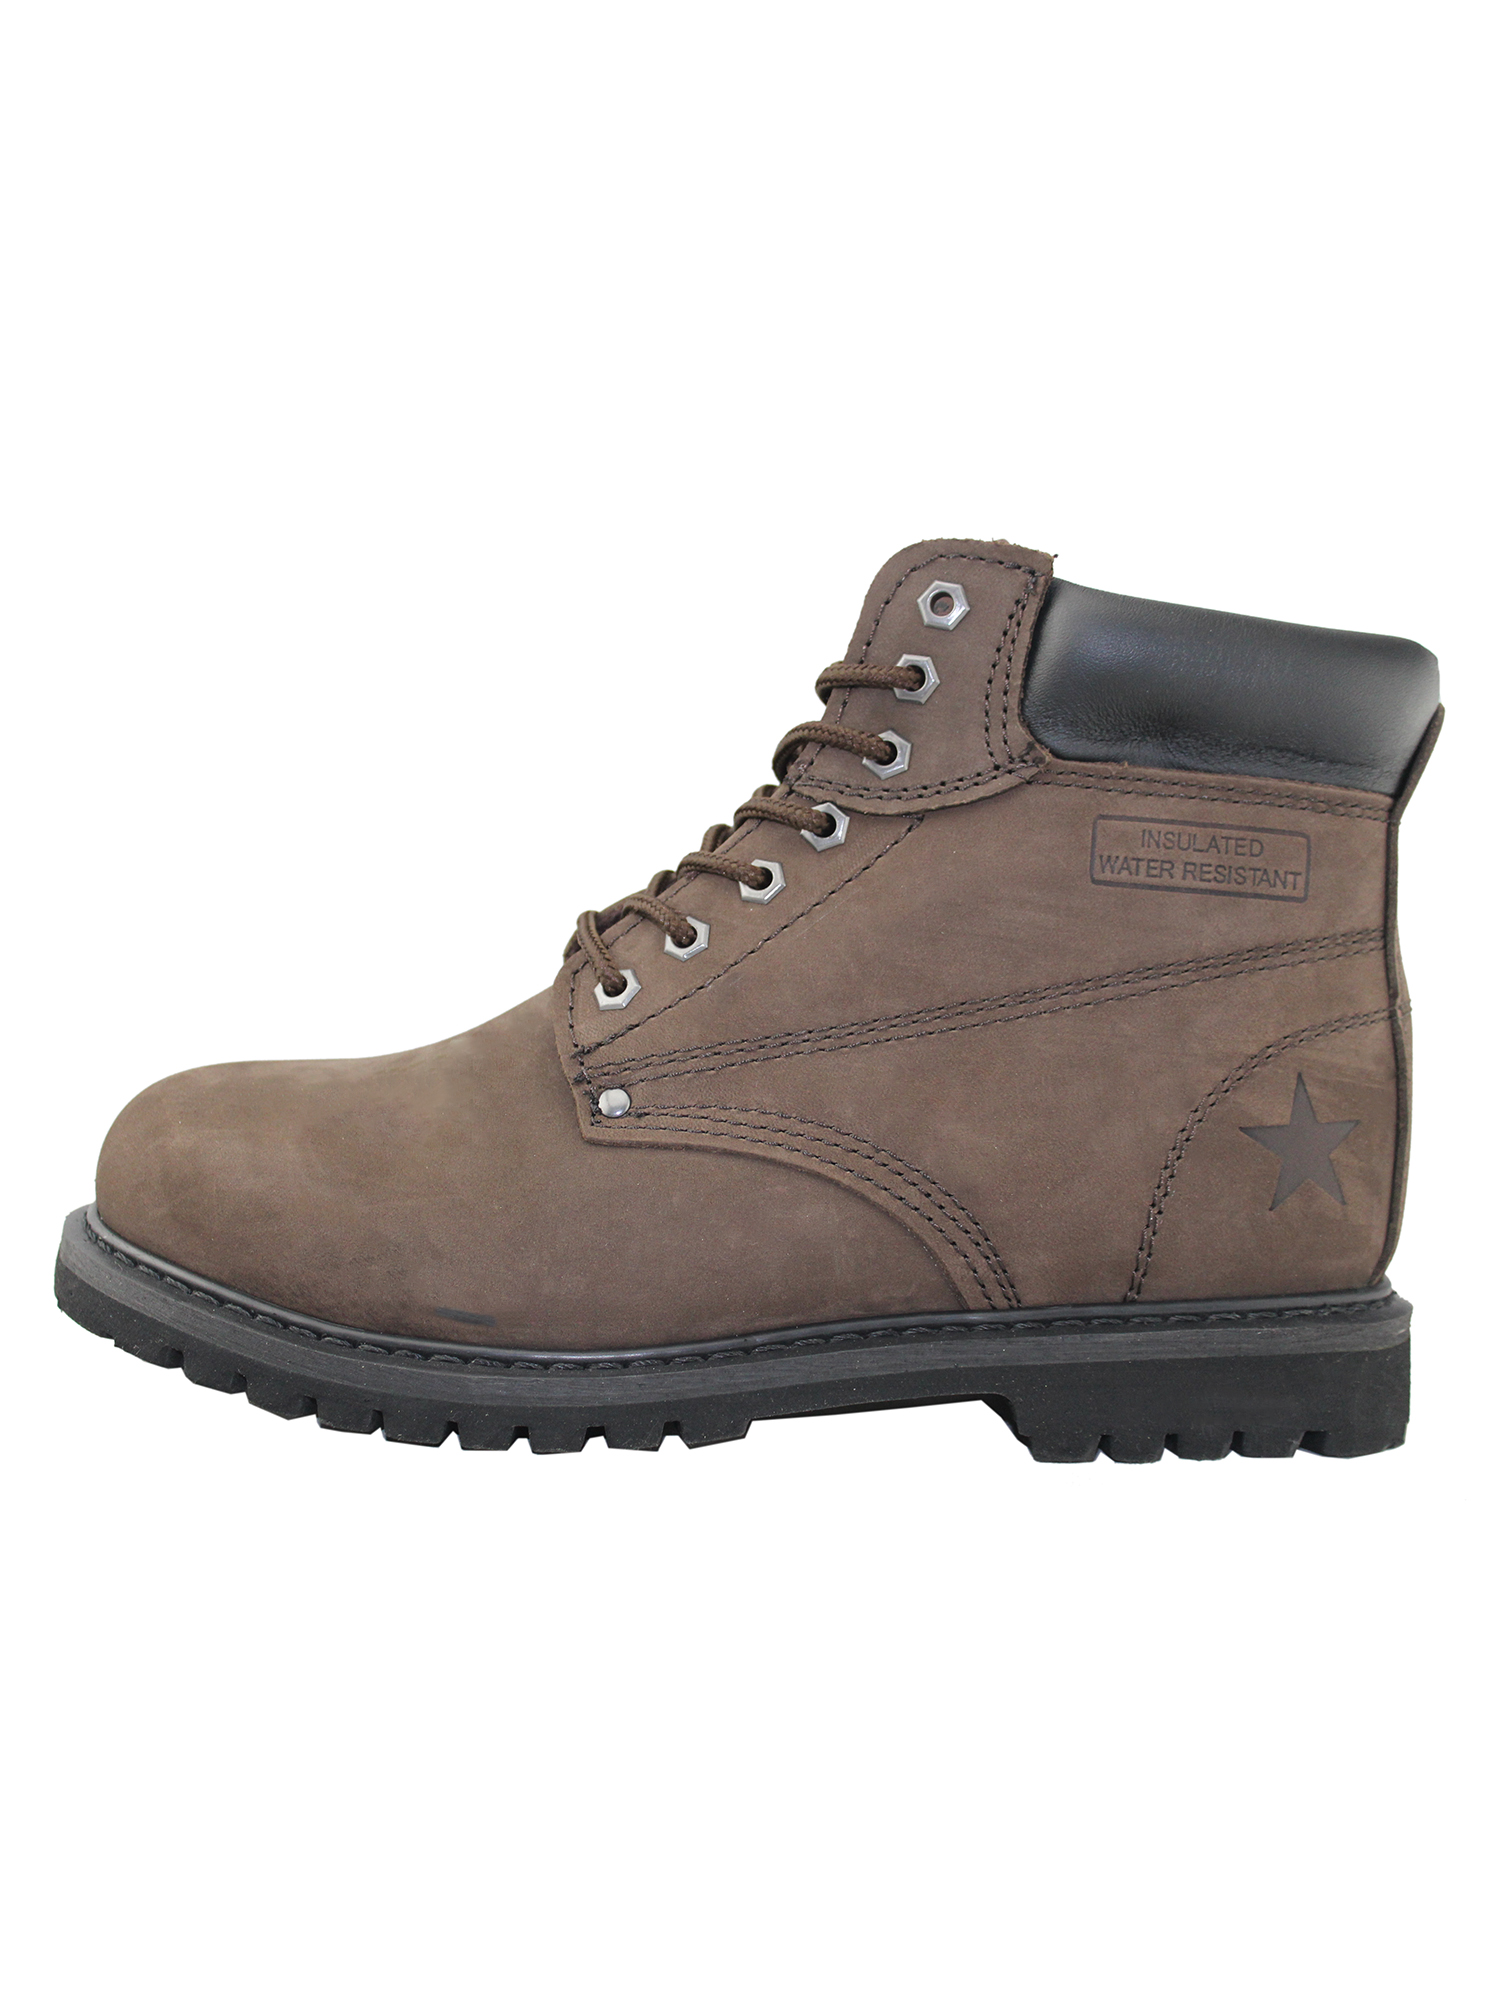 Mens Casual Work Shoes Fashion Nubuck Leather Lace-Up Ankle Work Boots - image 4 of 7